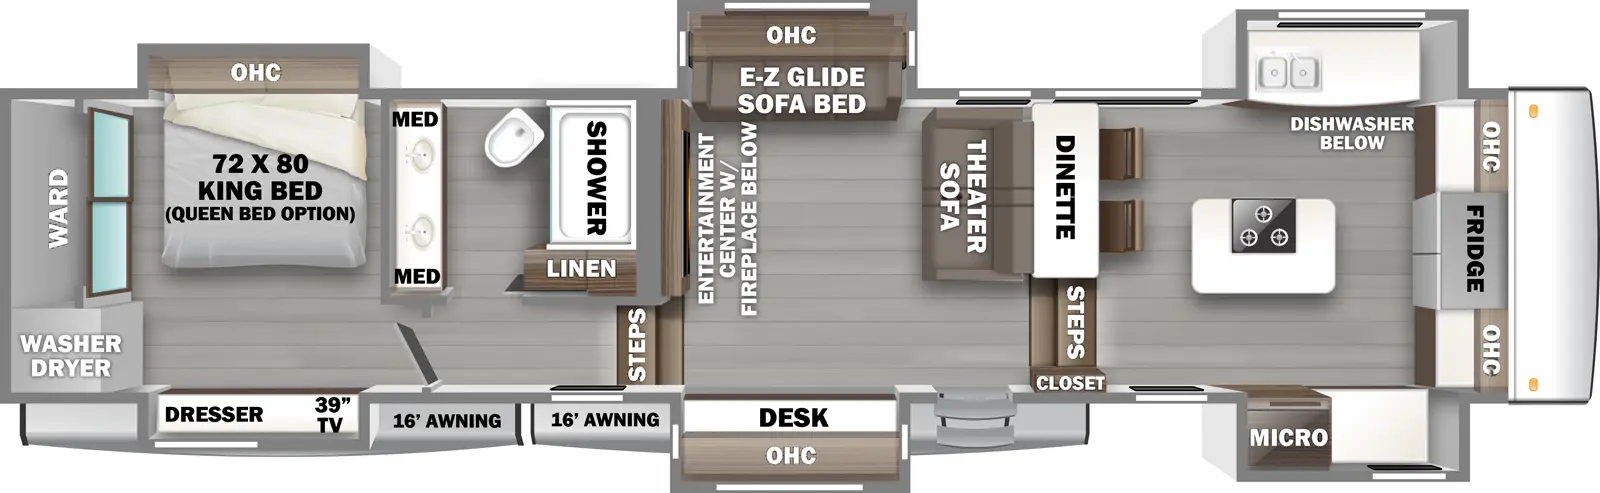 The 421FK has 6 slideouts and one entry. Exterior features two 16 foot awnings. Interior layout front to back: refrigerator with counter and overhead cabinet on each side, off-door side slideout with counter, sink and overhead cabinet, door side slideout with microwave and countertop, kitchen island with cooktop, and dinette along inner wall; steps down to living room and entry; theater sofa along inner wall, off-door side slideout with e-z glide sofa bed with overhead cabinet, door side slideout with desk and overhead cabinet, and entertainment center with fireplace below along inner wall; steps up to rear bedroom and bathroom; off-door side full bathroom with dual sinks and medicine cabinets, and linen closet; rear bedroom with off-door side king bed (optional queen bed) slideout with overhead cabinet, door side slideout with dresser and TV, and rear wardrobe with washer and dryer.